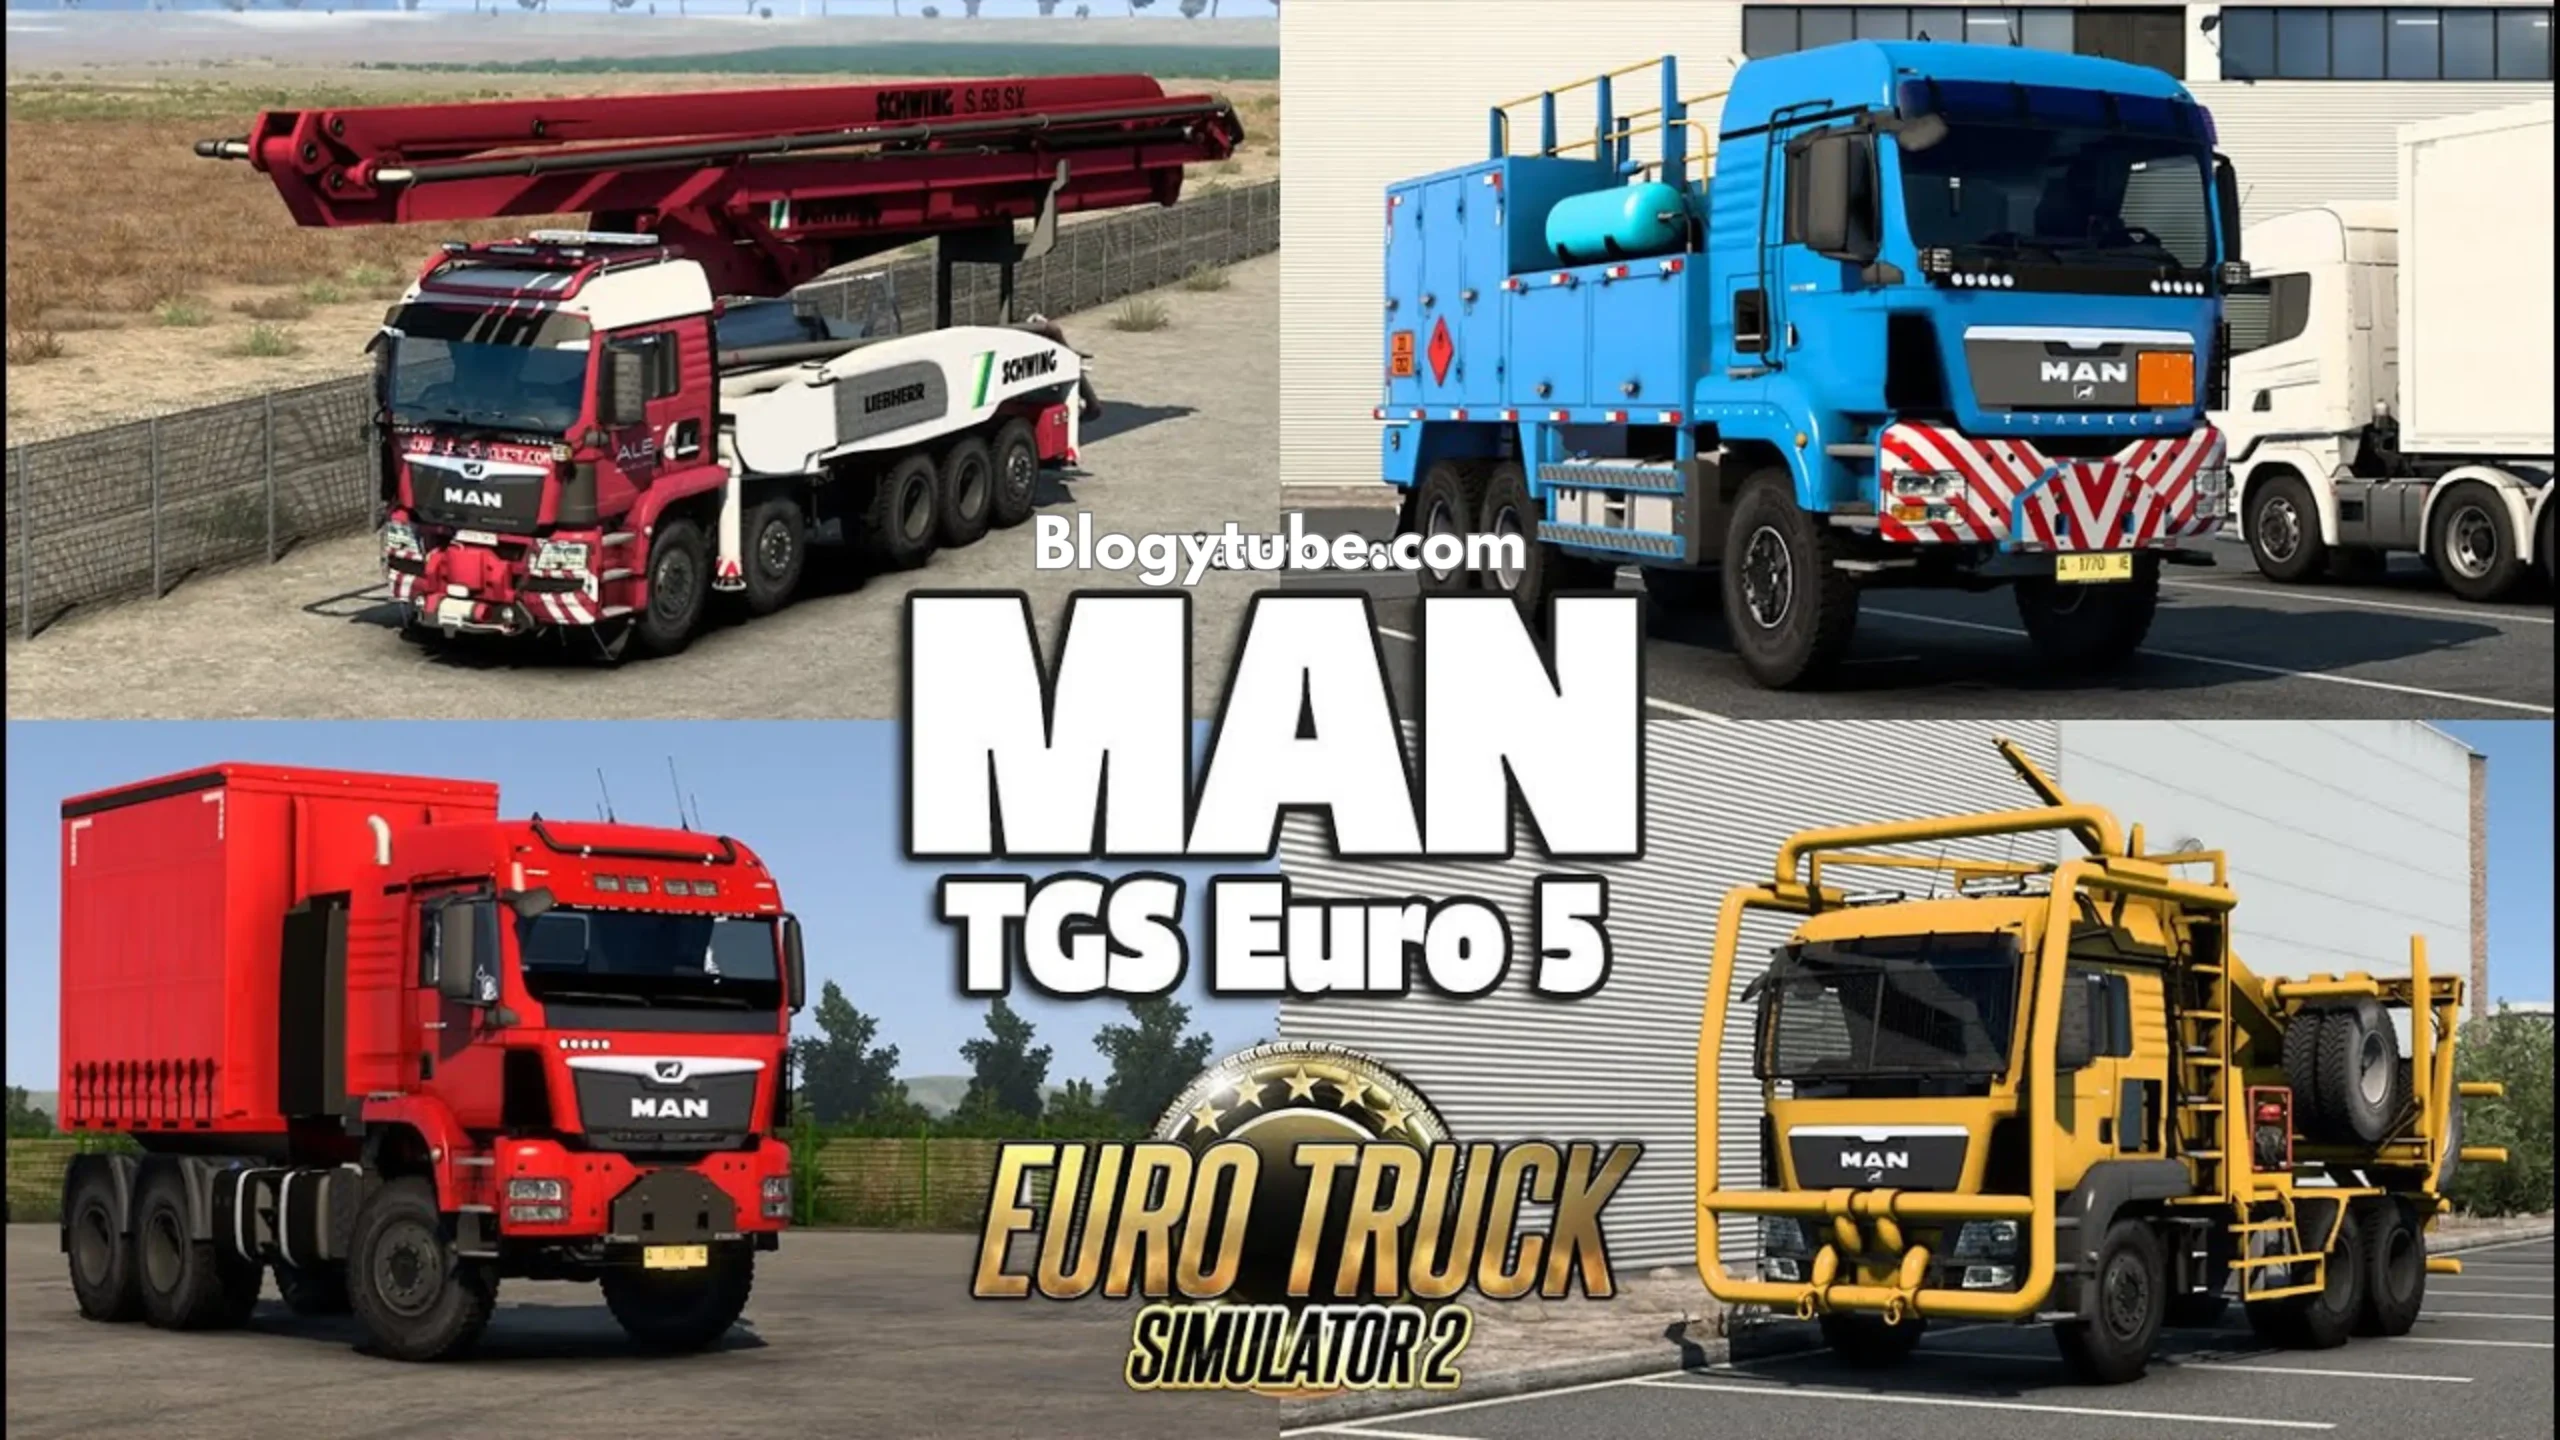 Euro Truck Simulator 2 Complete Details – Features